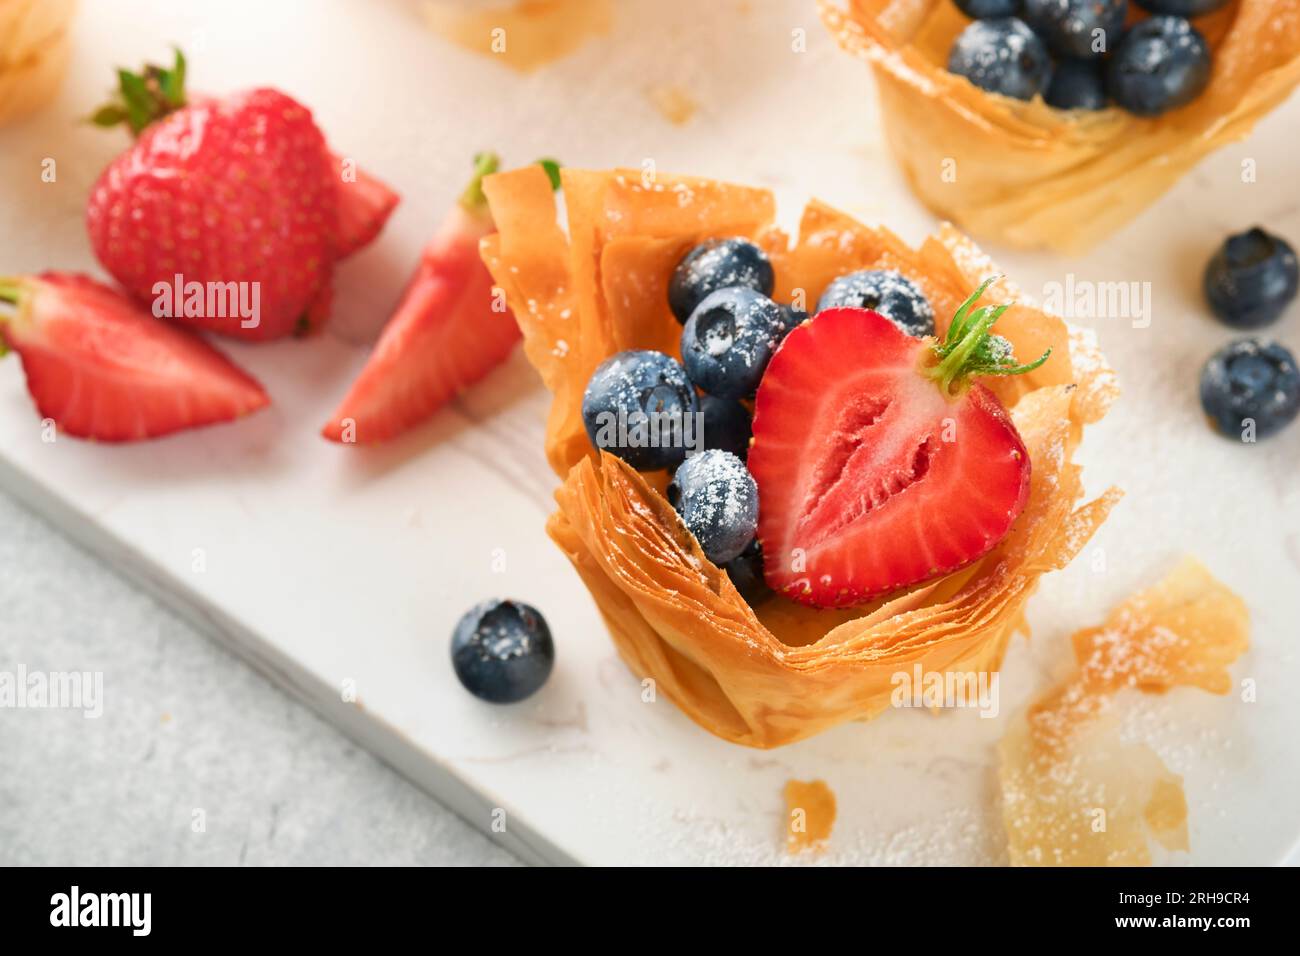 Phyllo or filo pies with fresh berries strawberries and blueberries, cheese filling topped with fresh mint on white plate. Homemade Filo pastry pasket Stock Photo